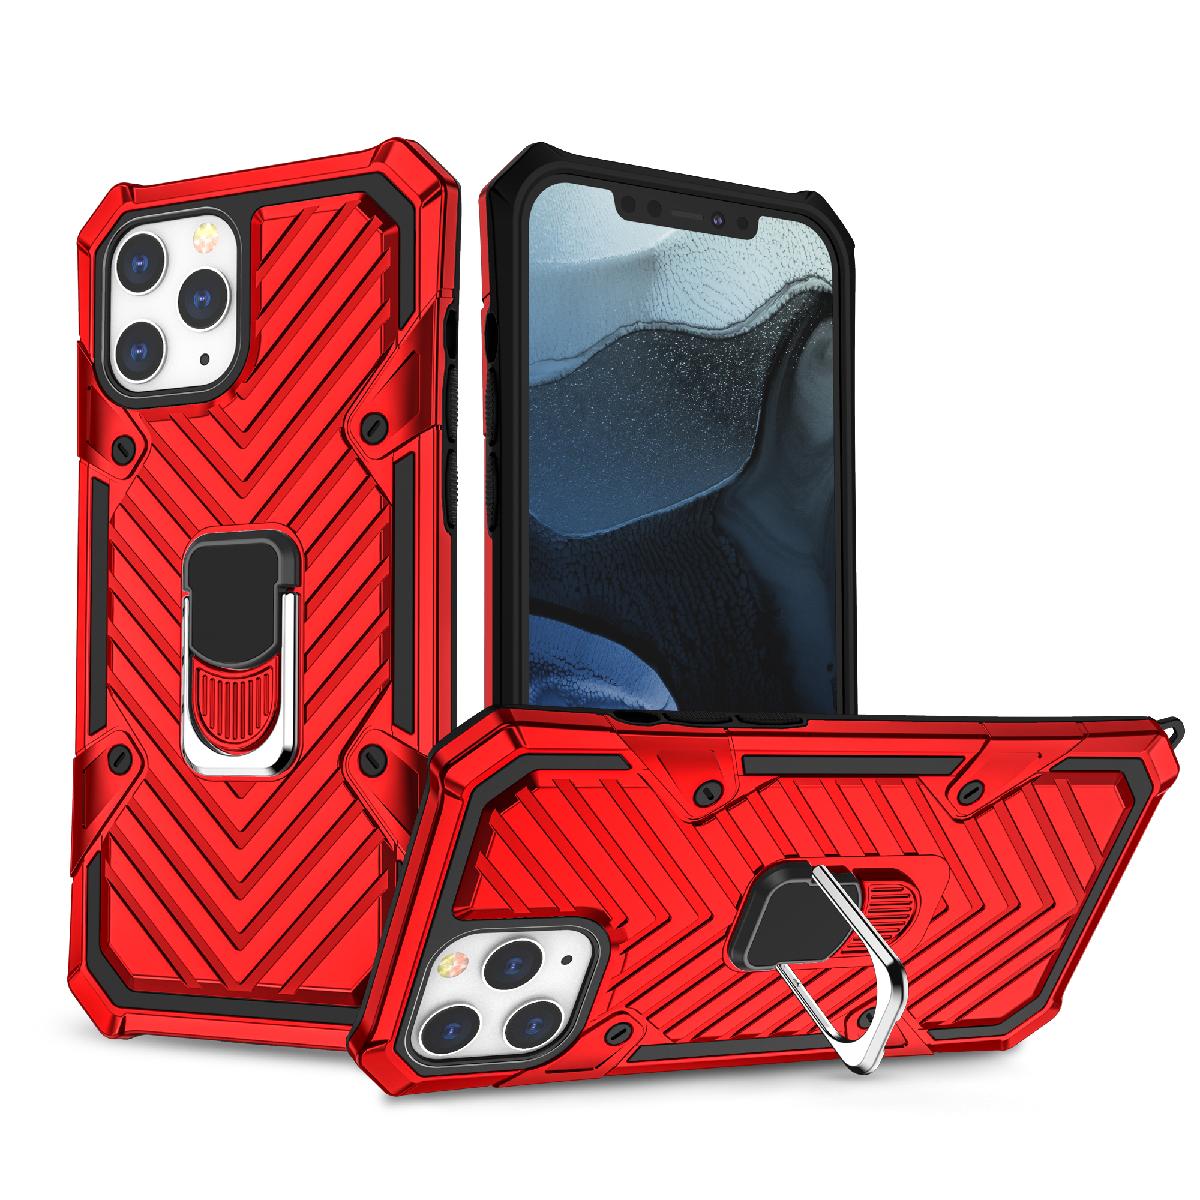 IPHONE 12/ IPHONE 12 PRO Kickstand Anti-Shock And Anti Falling Case In Red